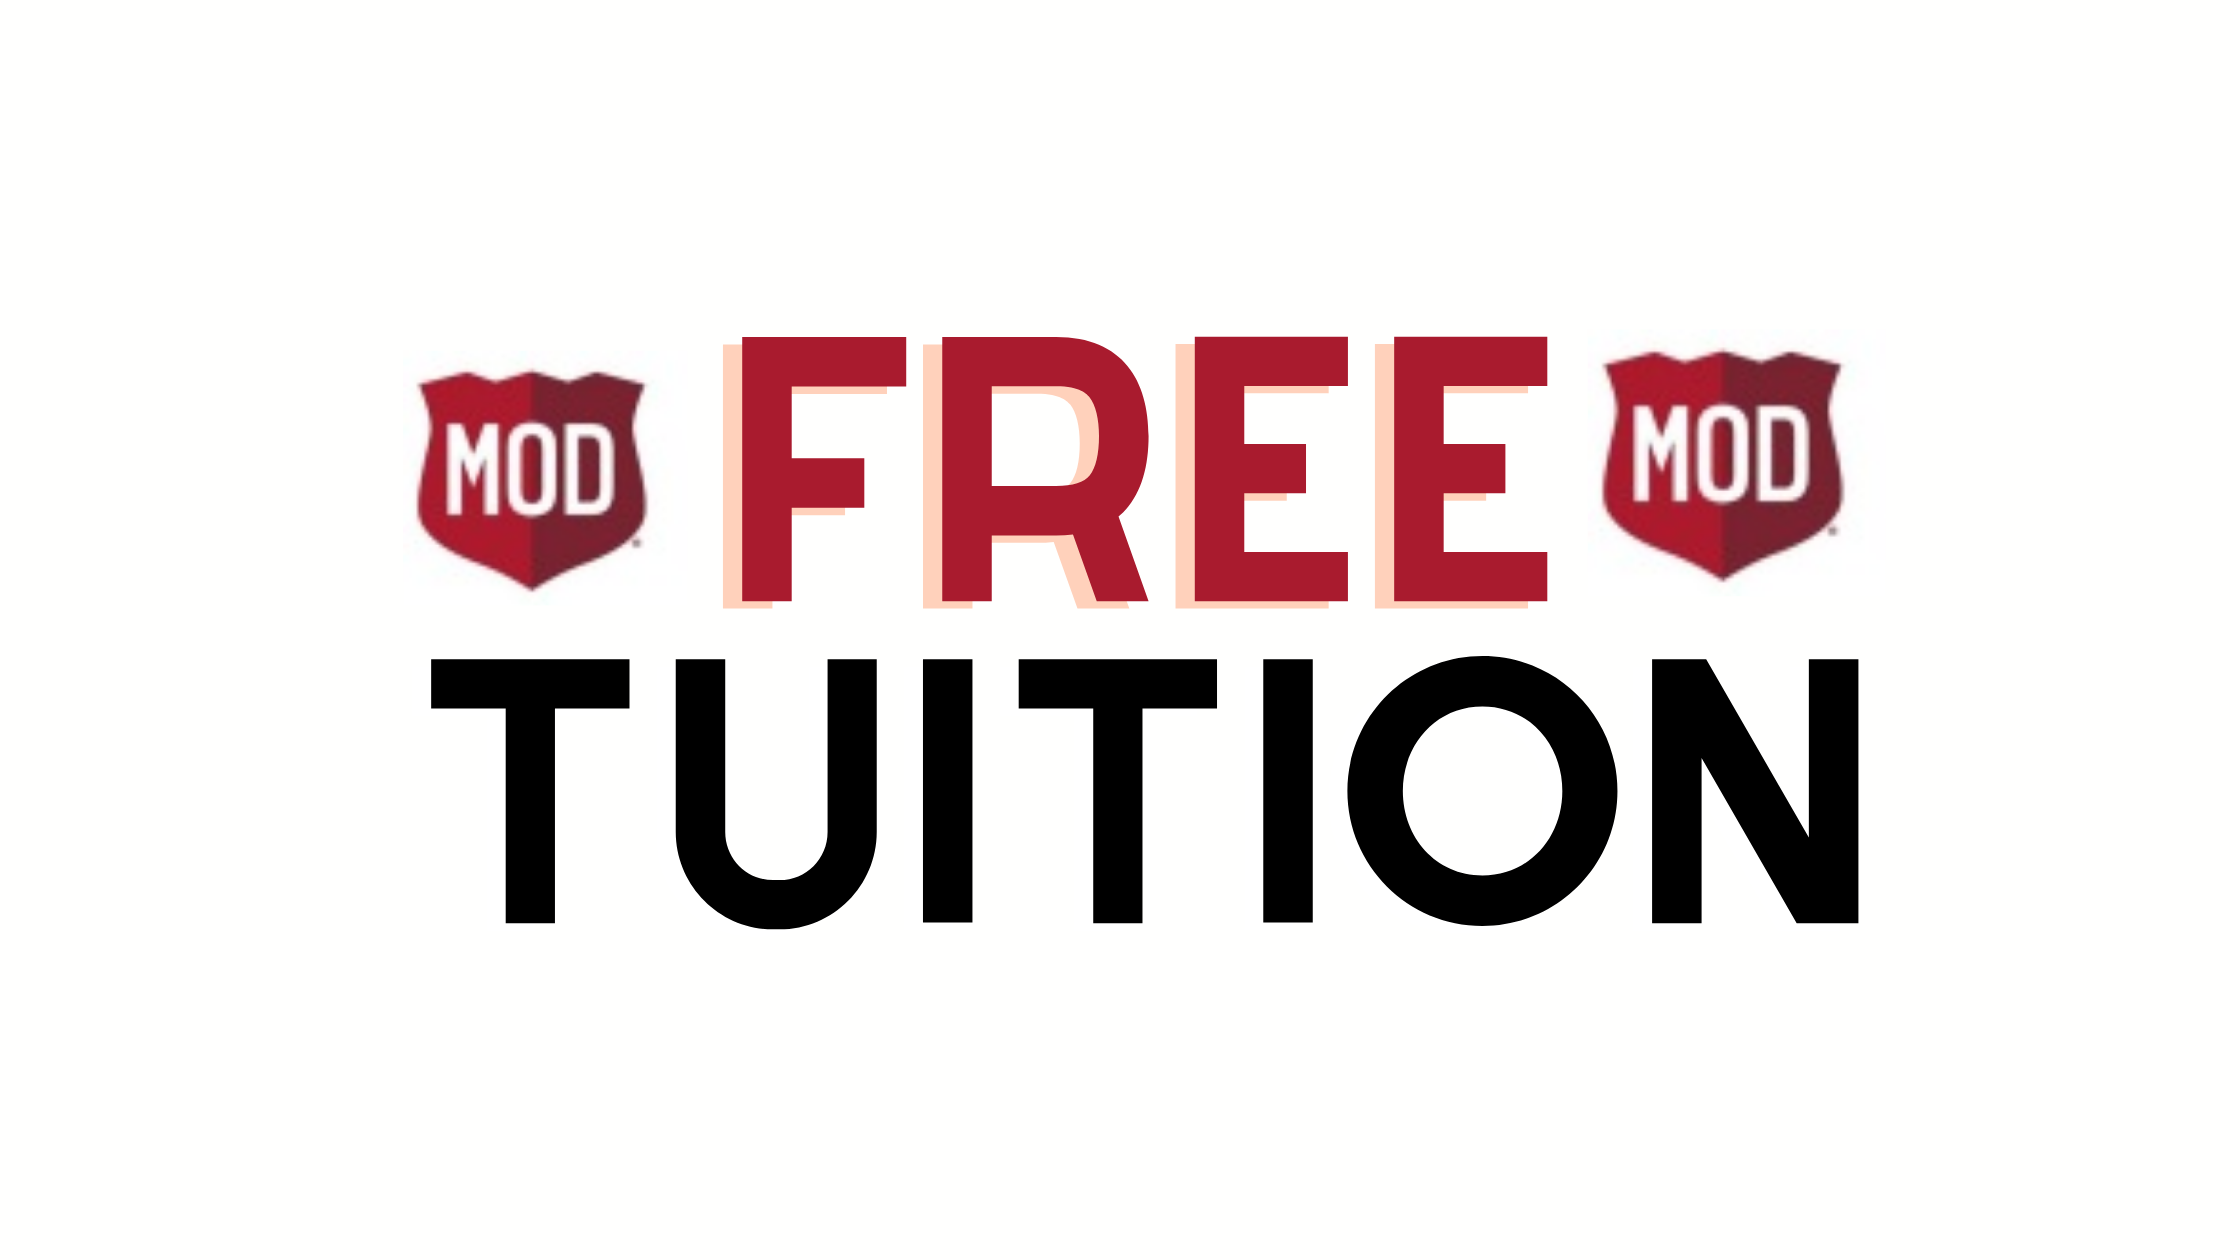 mod pizza free tuition